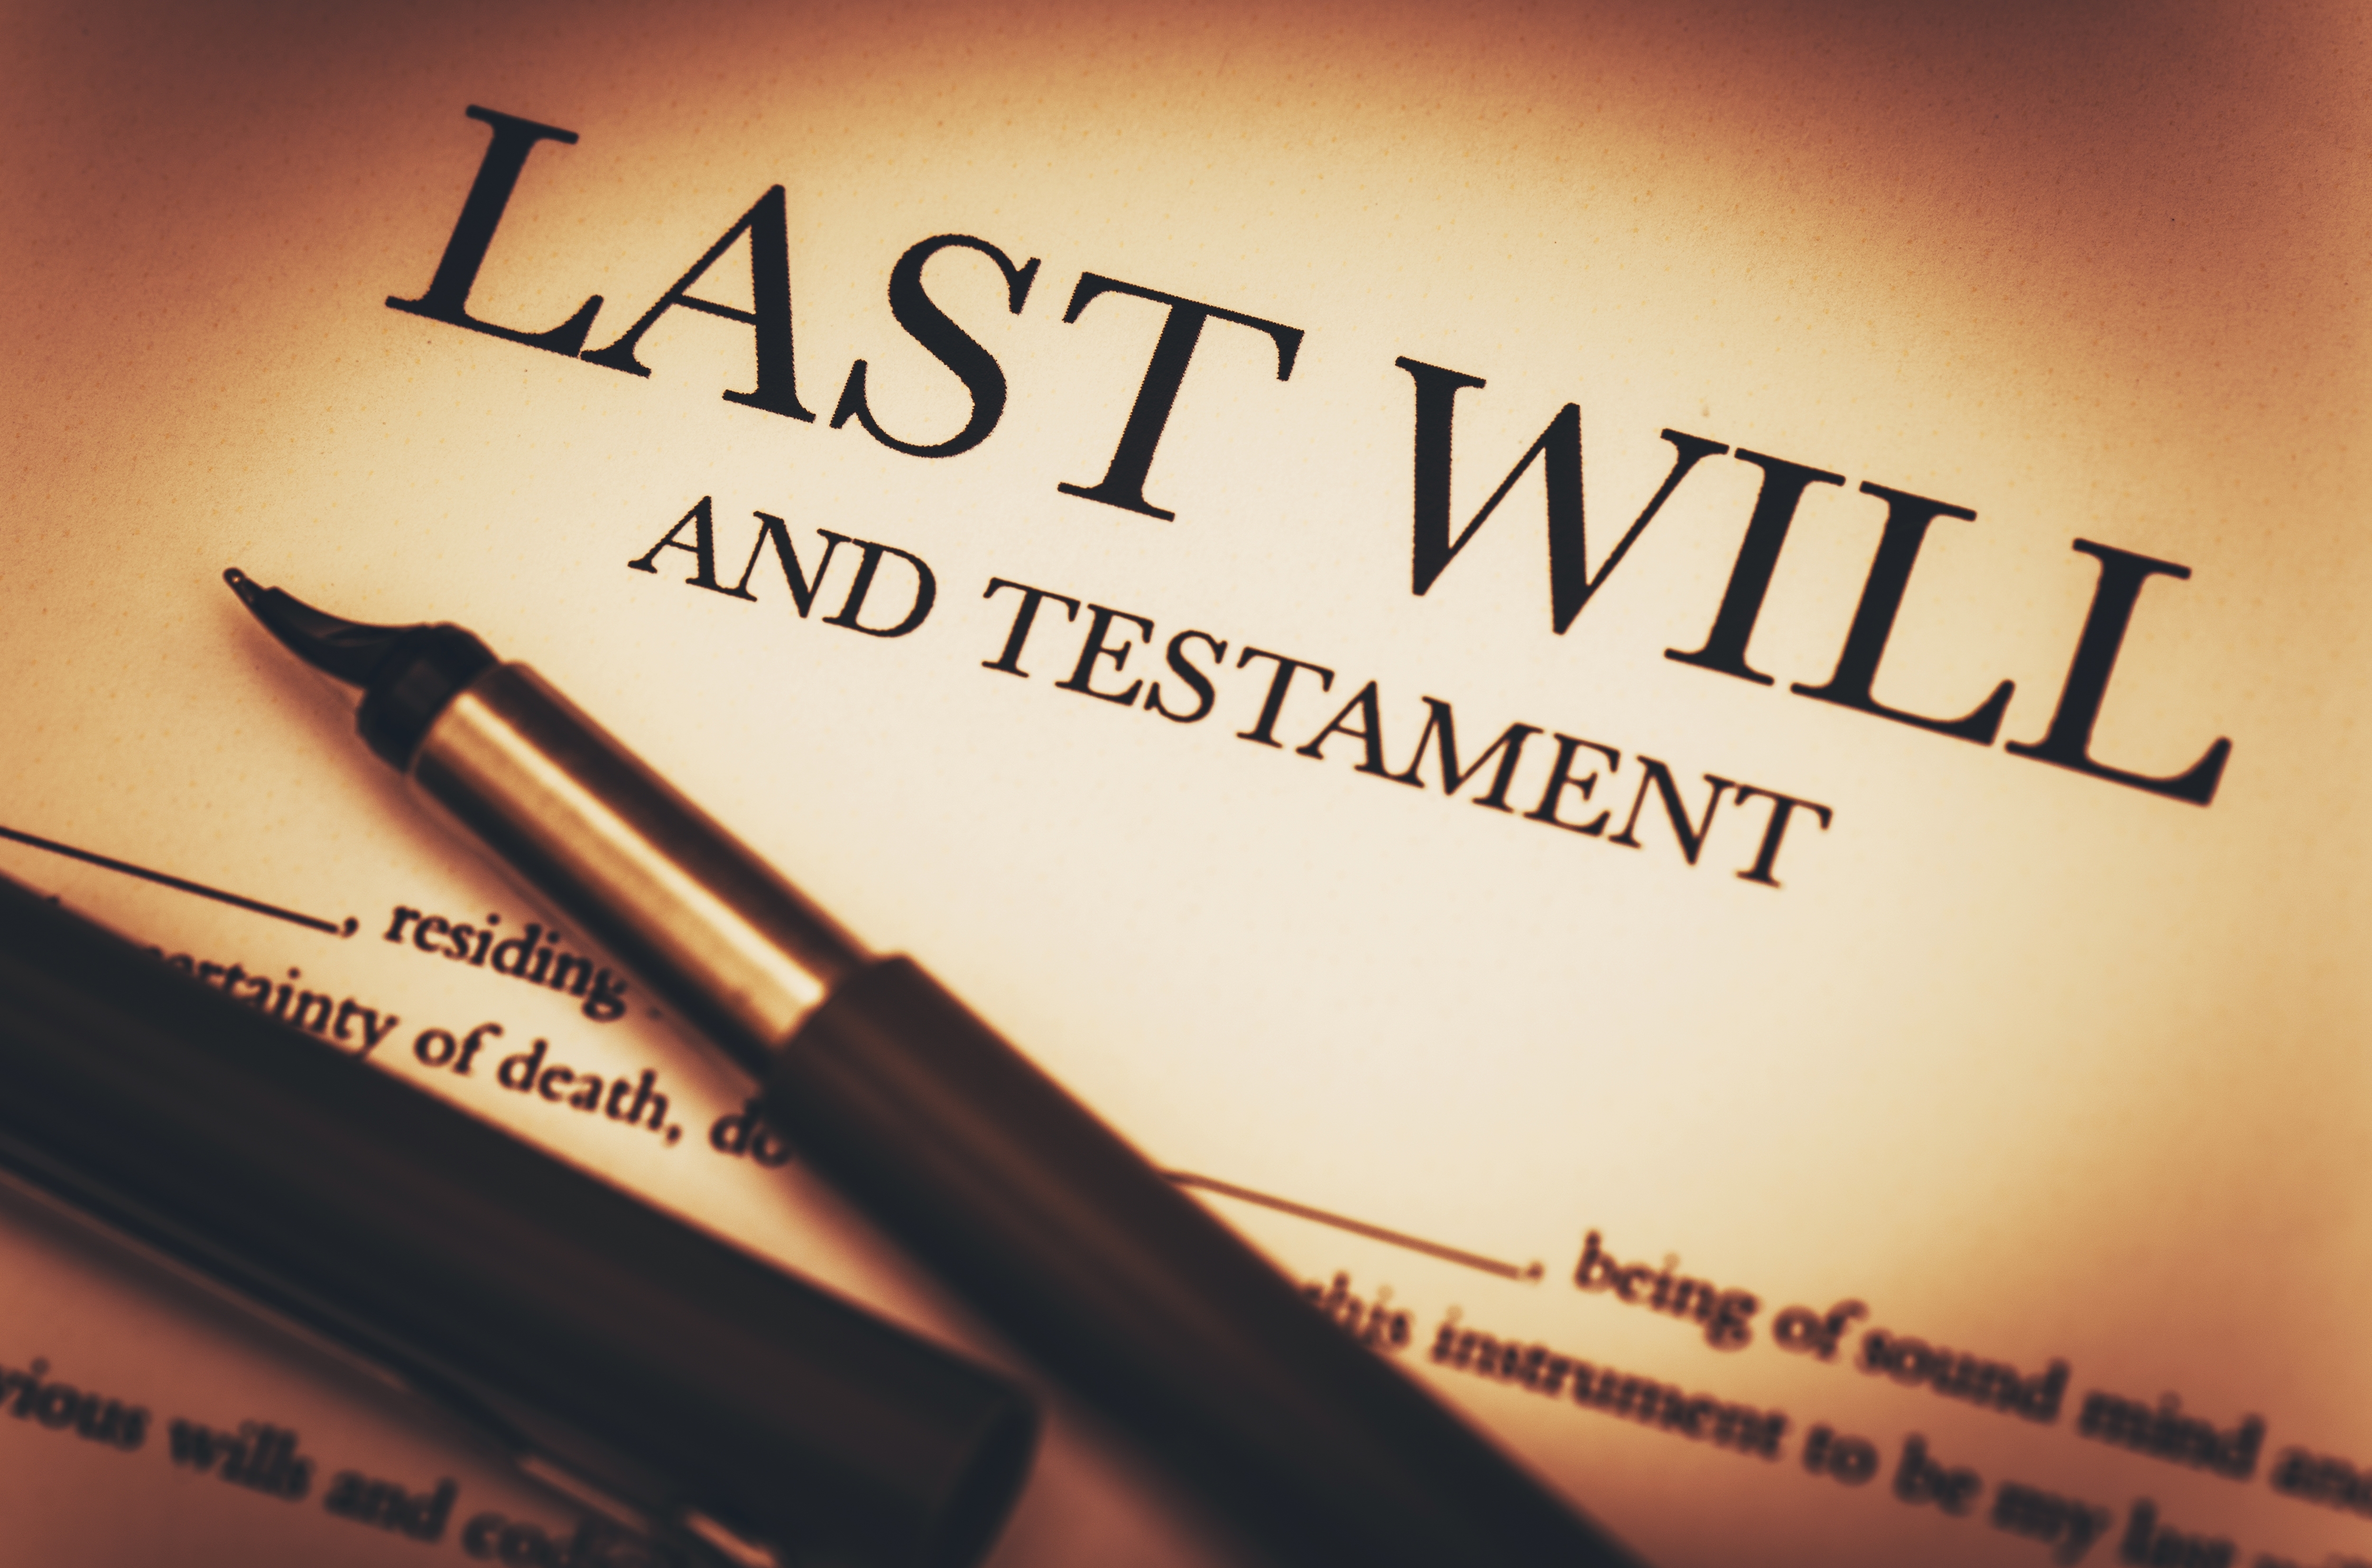 A document with the heading "Last Will and Testament" | Source: Shutterstock